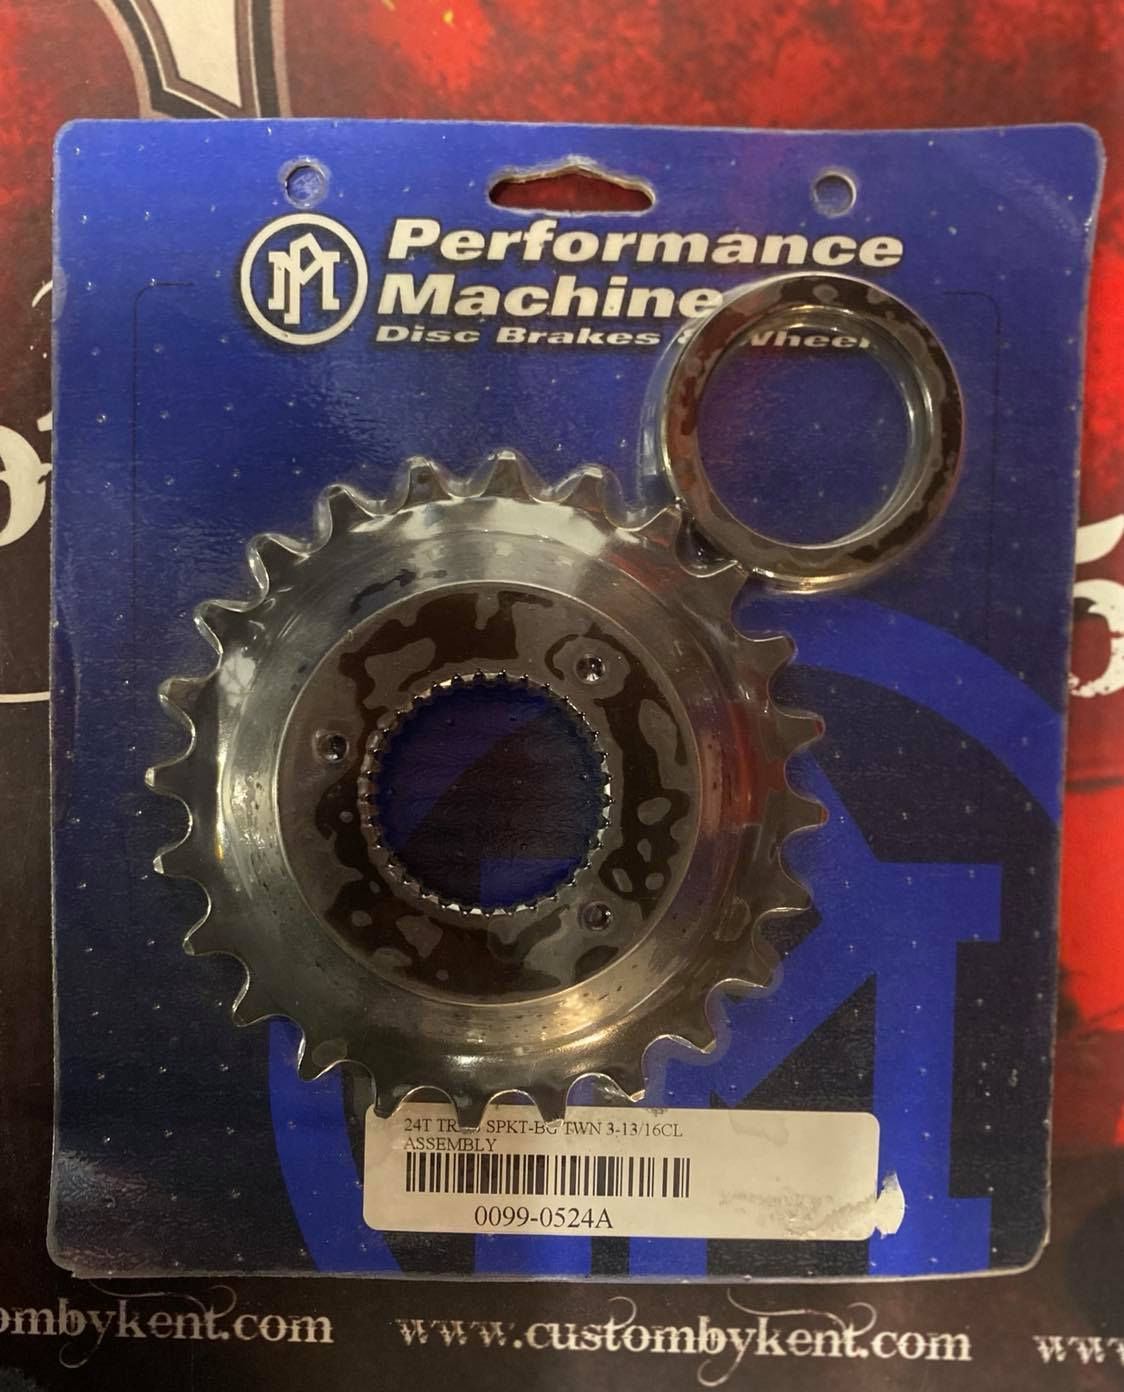 24T TRANS SPROCKET BIG TWIN 3-13/16CL ASSEMBLY